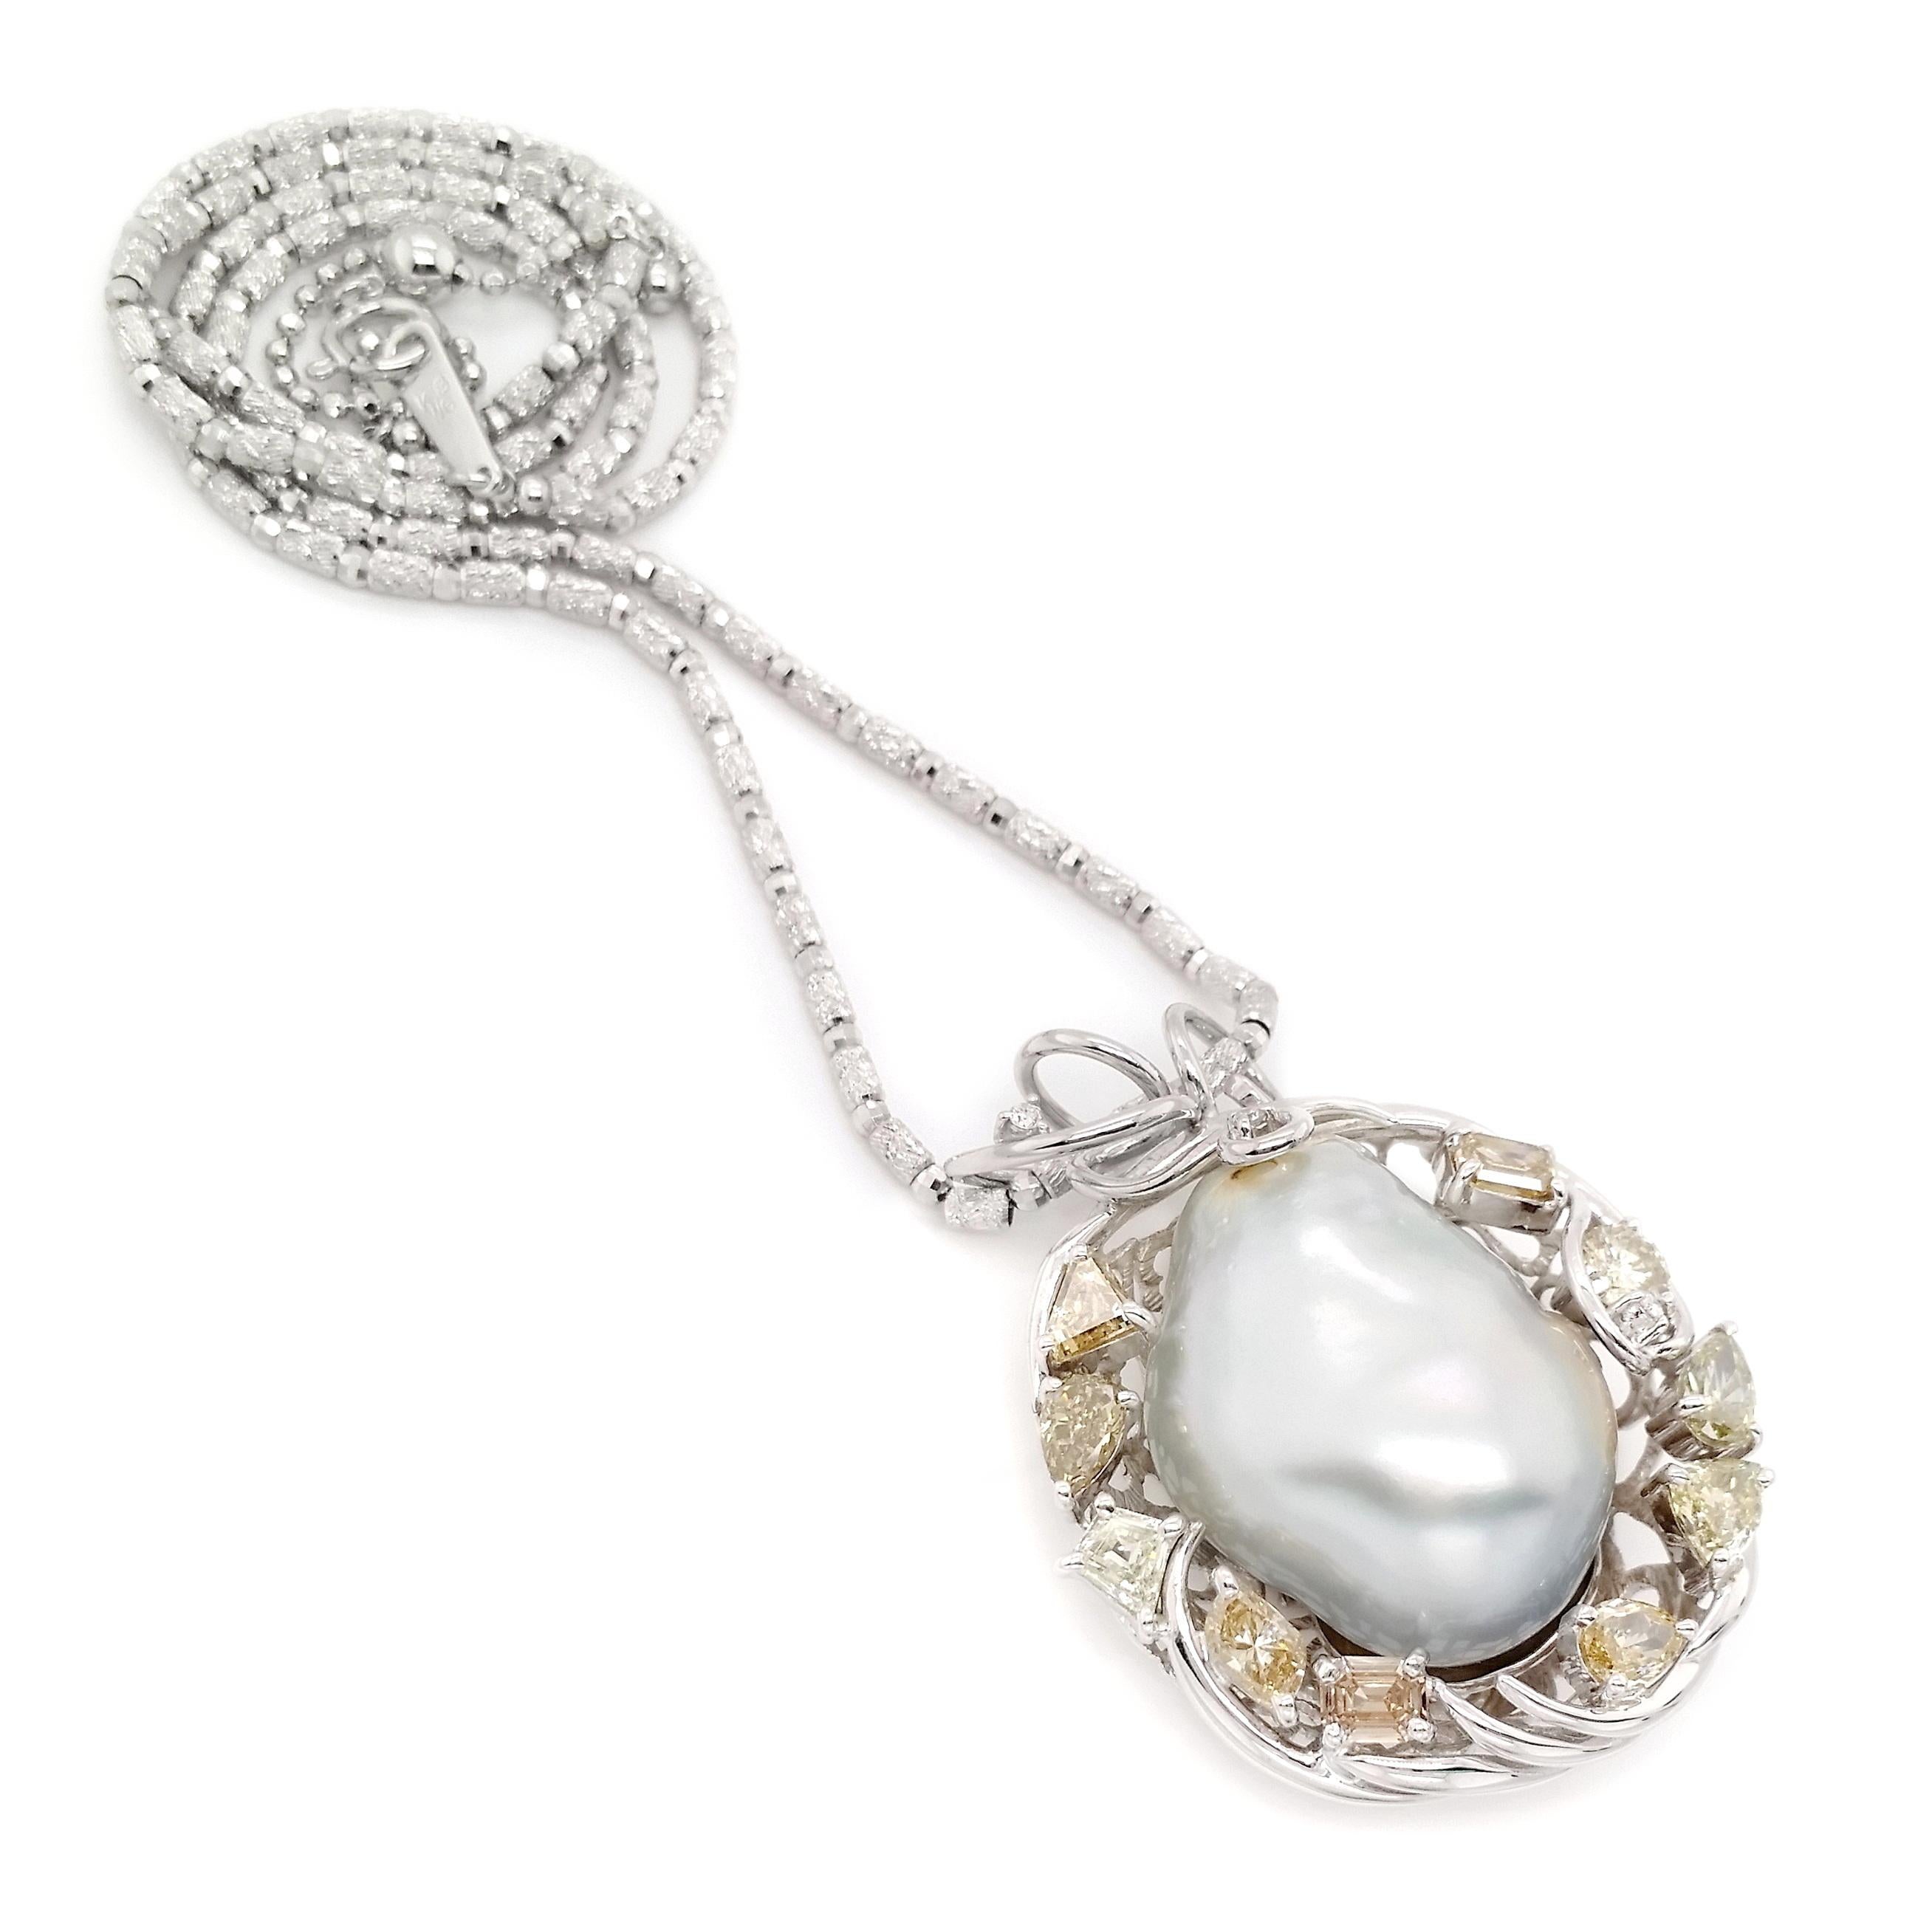 Drape yourself in sophistication with our cultured pearl and 3.21 carats of natural diamonds, set in a mixed cut, on an 18K white gold pendant accompanied by a chain. This exquisite piece, weighing 32.89 grams, is a harmonious blend of timeless